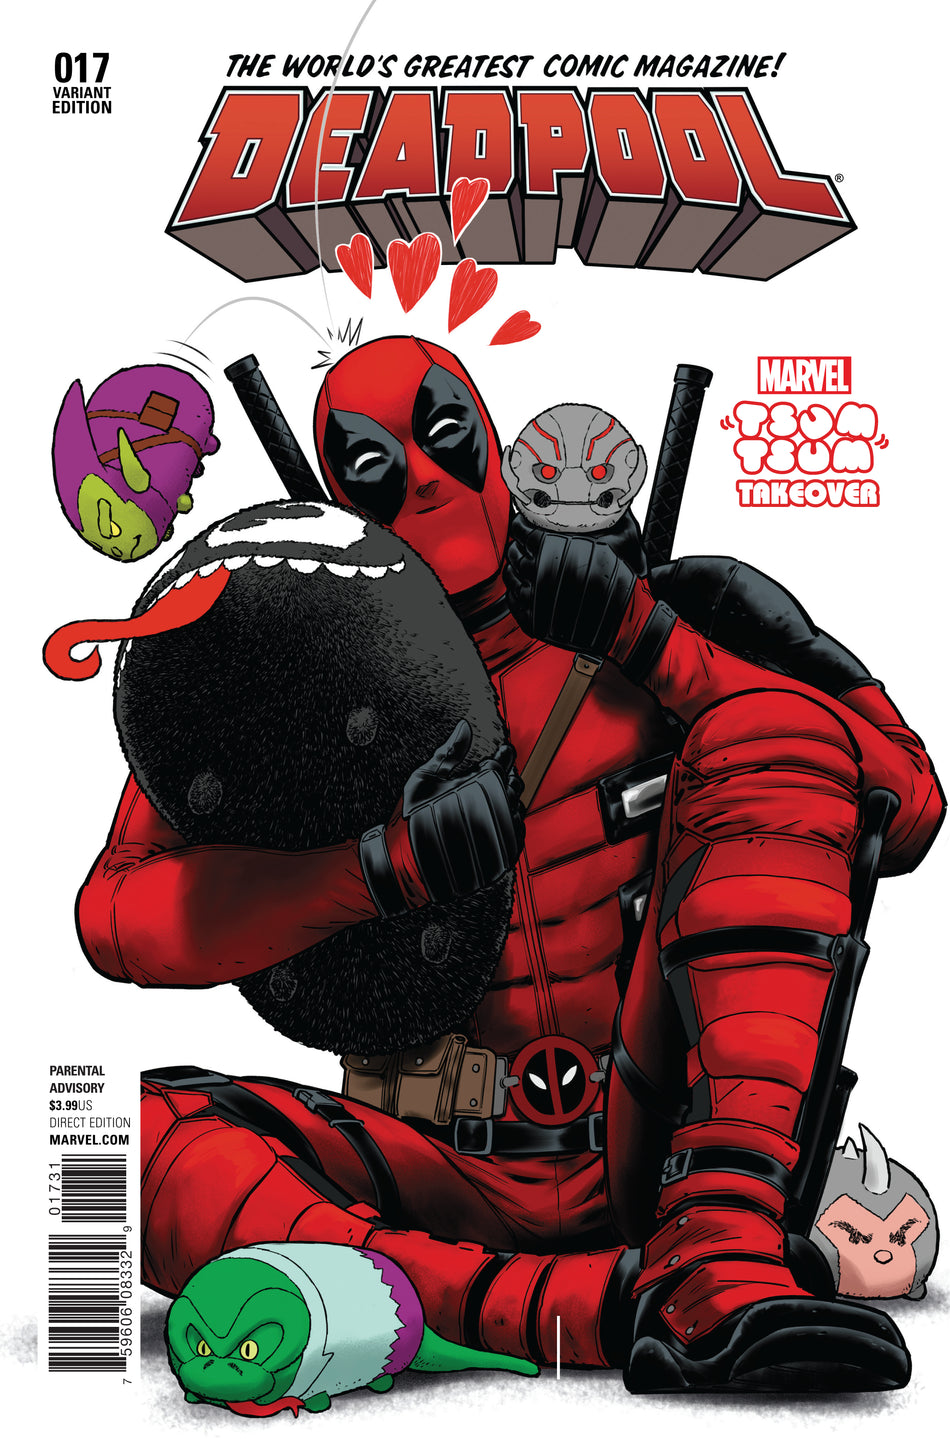 Photo of Deadpool Issue 17 Rodriguez Tsum Tsum Var Cw2 comic sold by Stronghold Collectibles